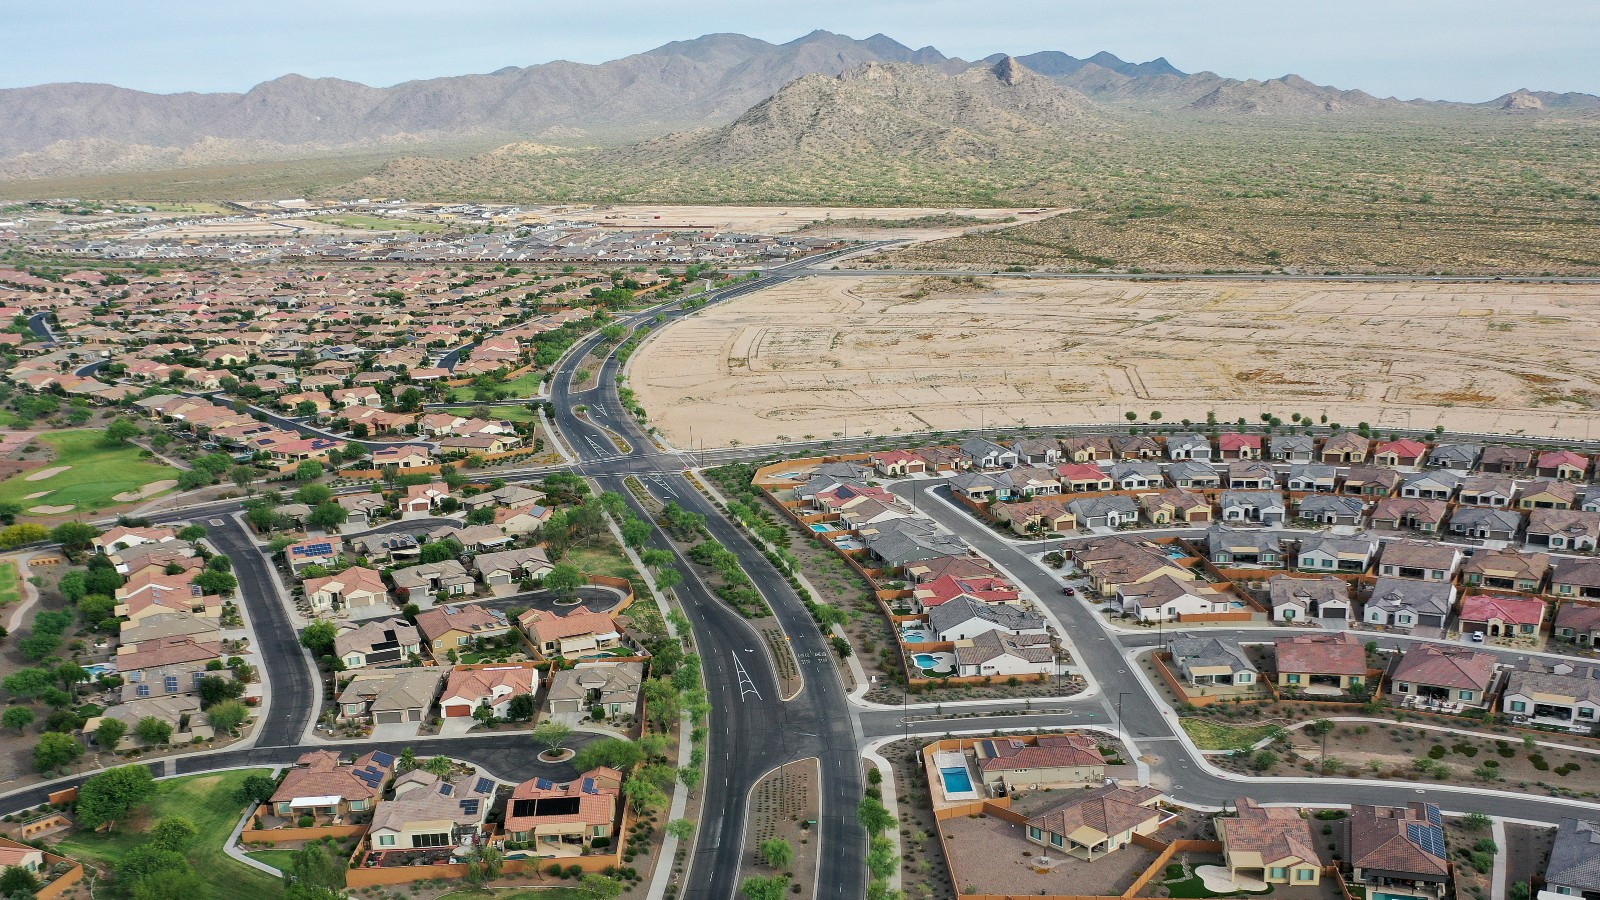 An aerial shot of a city at the foot of mountains and next to a slice of empty desert.